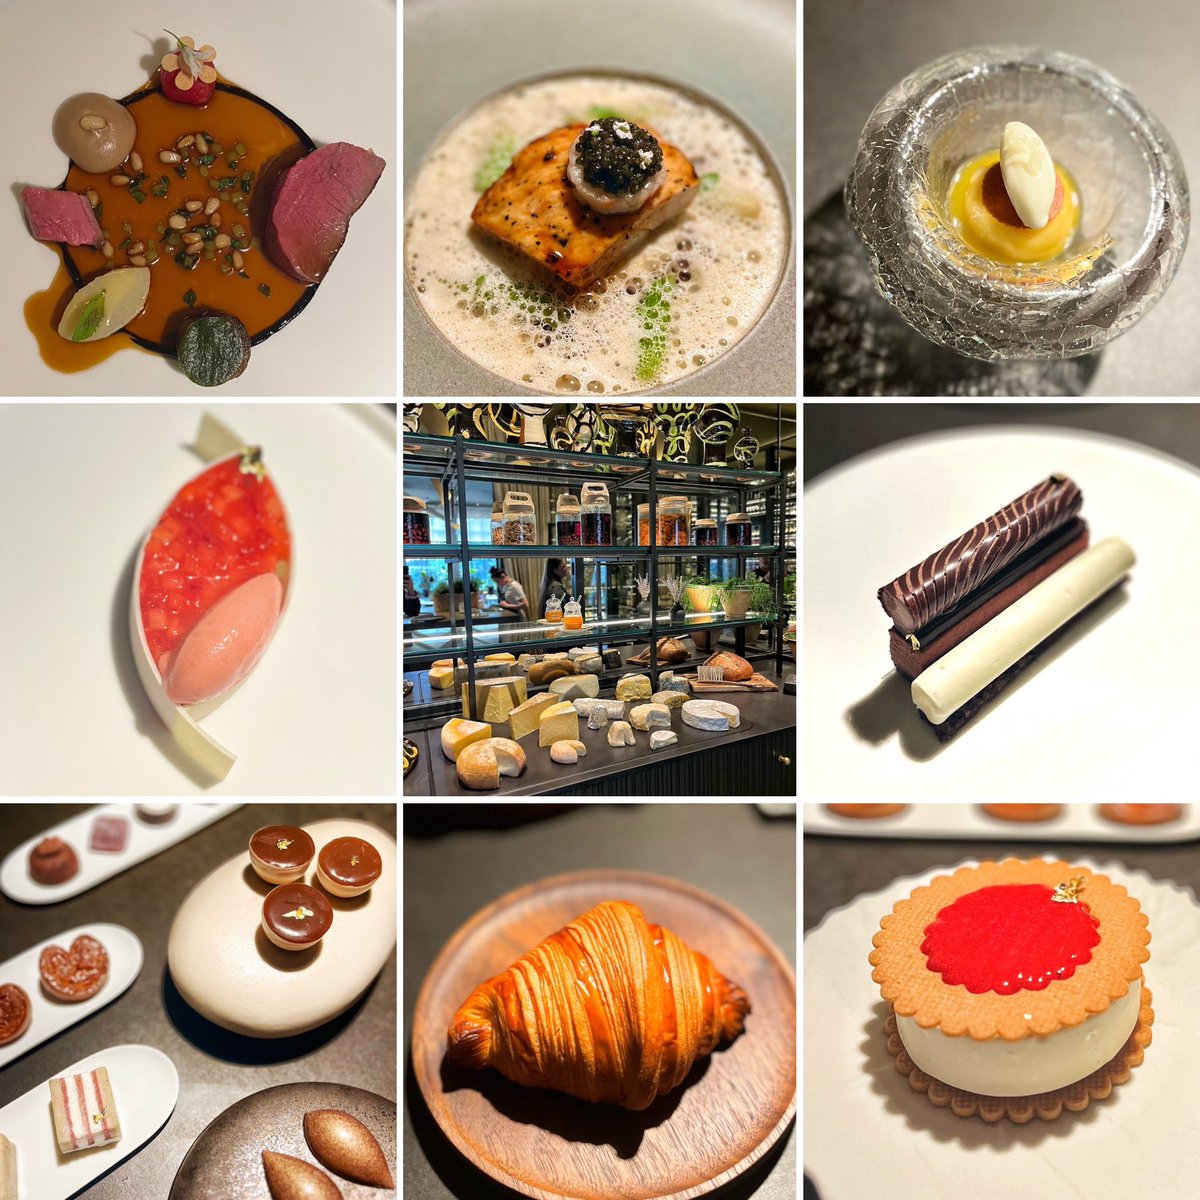 We enjoyed an INCREDIBLE meal to celebrate a friend’s special birthday a few weeks ago at “Woven by @ChefSmith1987” at @CoworthParkUK. Without fail, every single course was sublime, with a razor sharp attention to detail from both the kitchen and the front of house teams 👏🏻👏🏻👏🏻